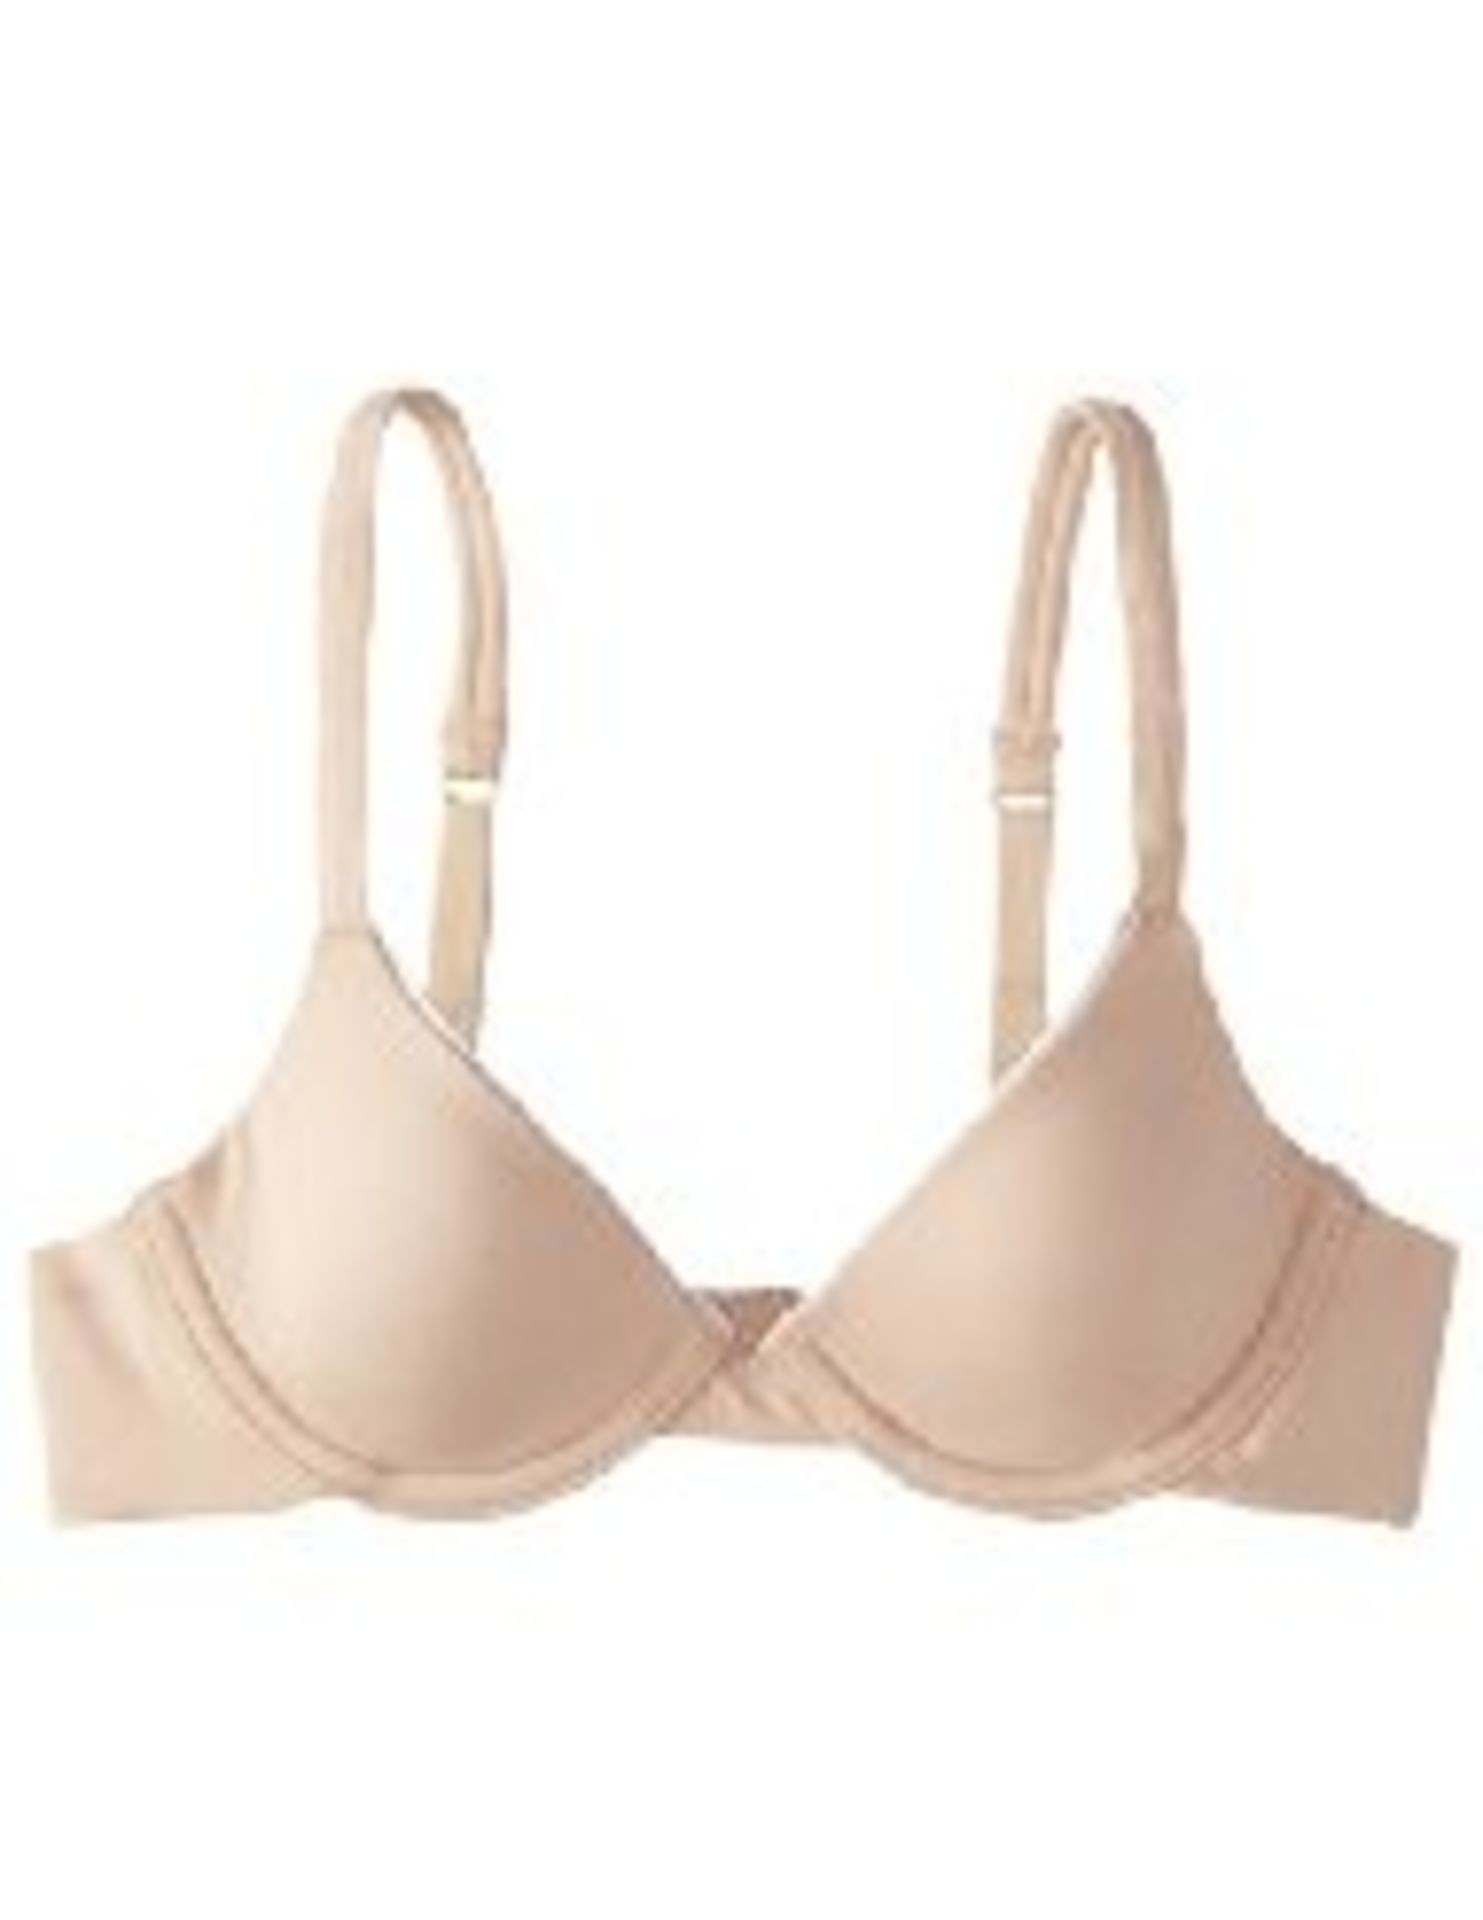 V Brand New Pink Maidenform For girls Fabulous Fit Bra Size 34A ISP £12.90 (JC Penney)